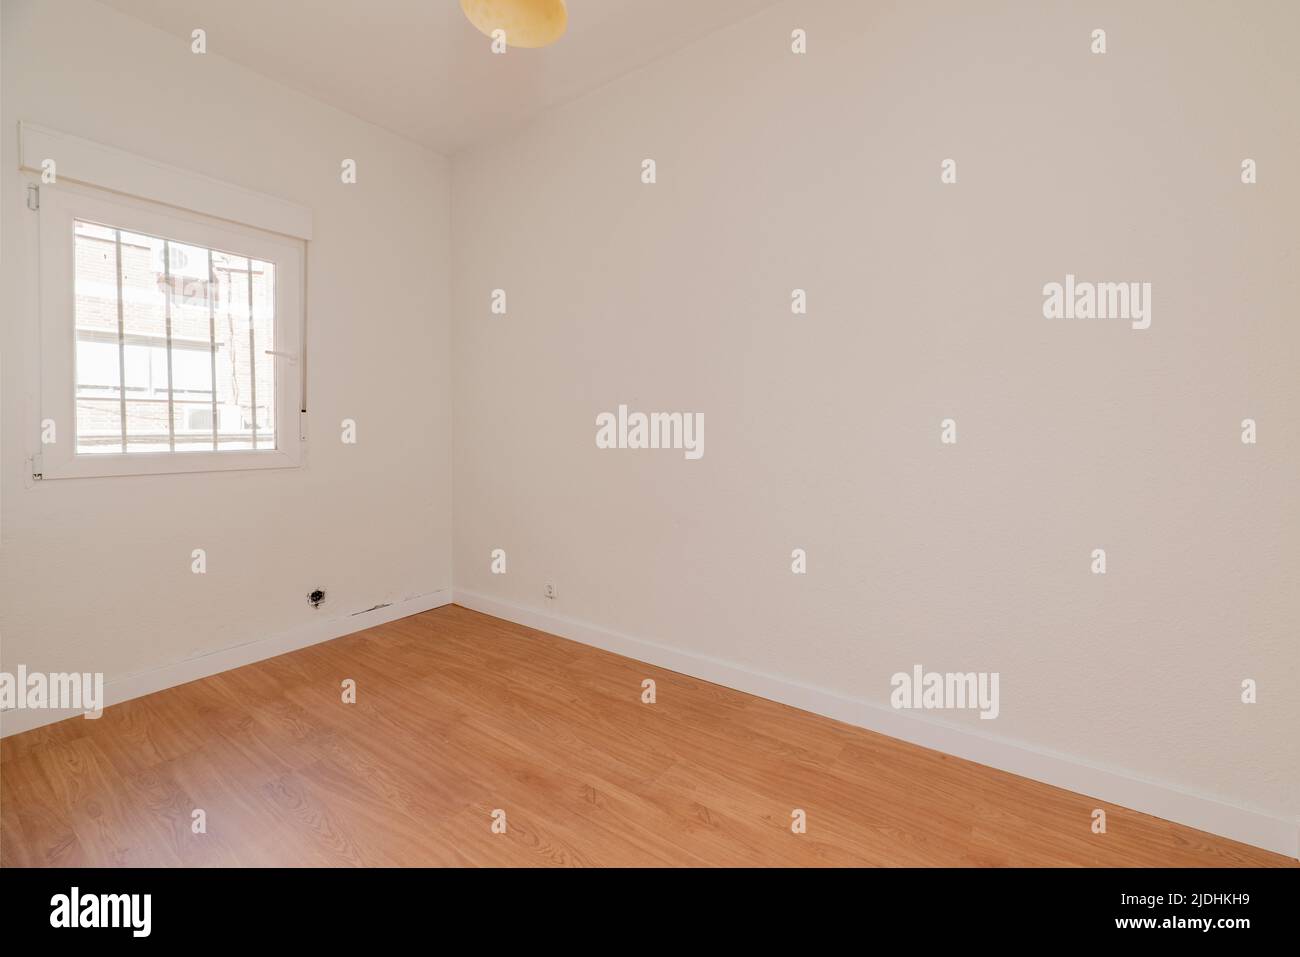 Empty room with oak parquet floor, white painted walls and white aluminum windows with a view Stock Photo